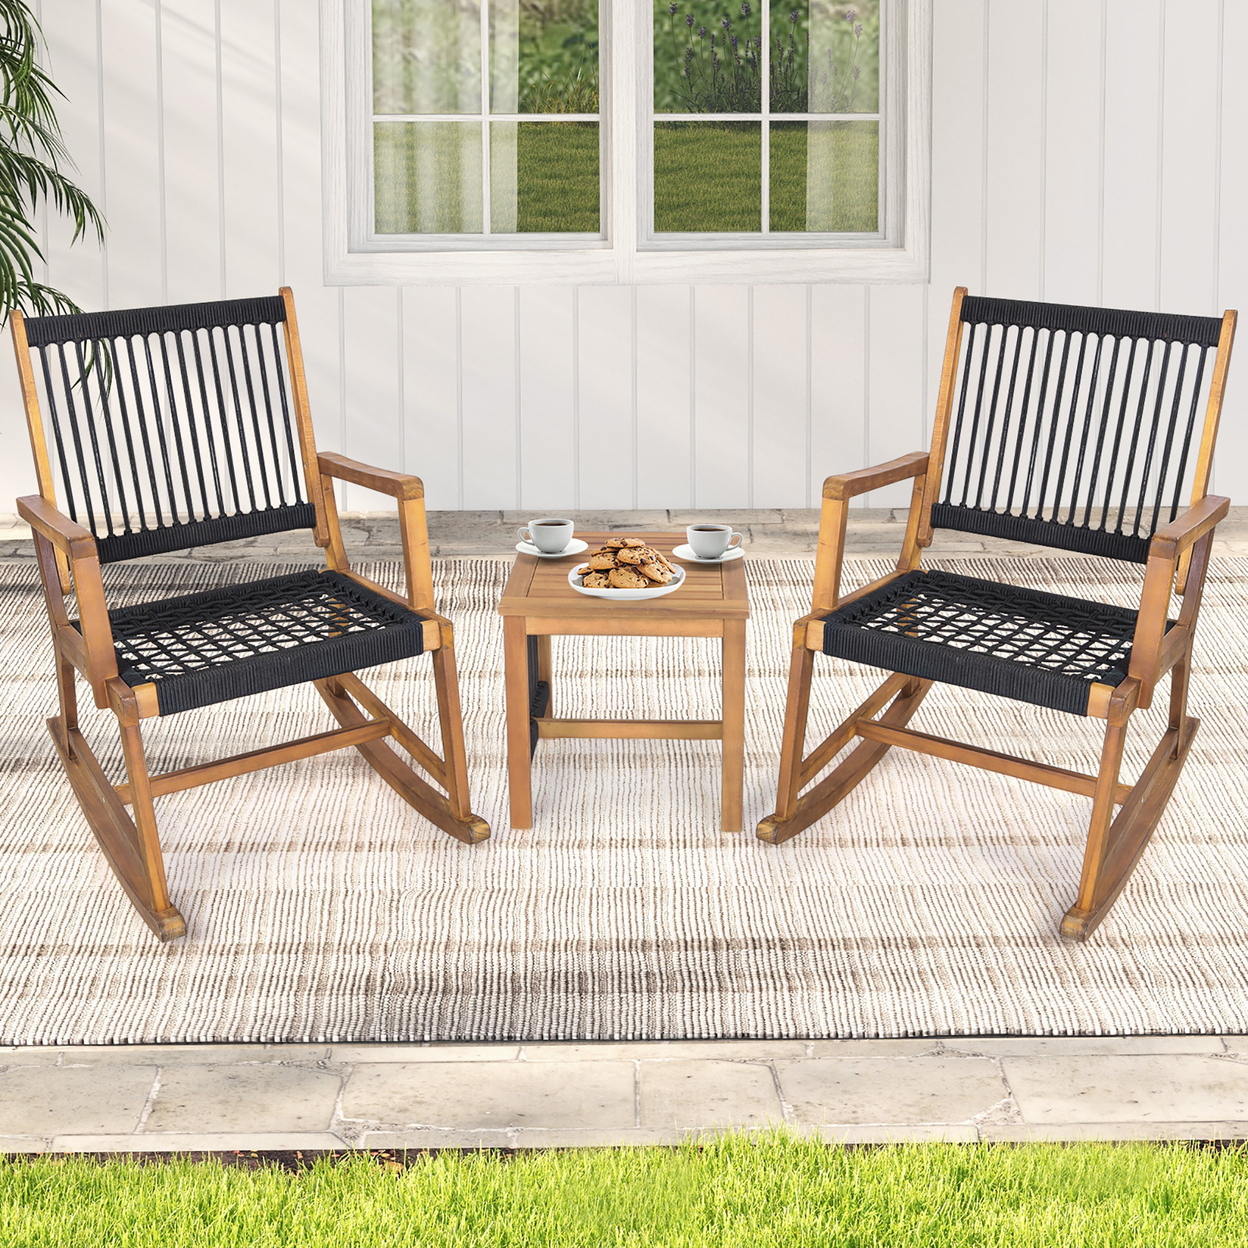 3 Piece Acacia Wood Rocking Chair Set W/ Coffee Table & All-Weather Rope Patio Poolside